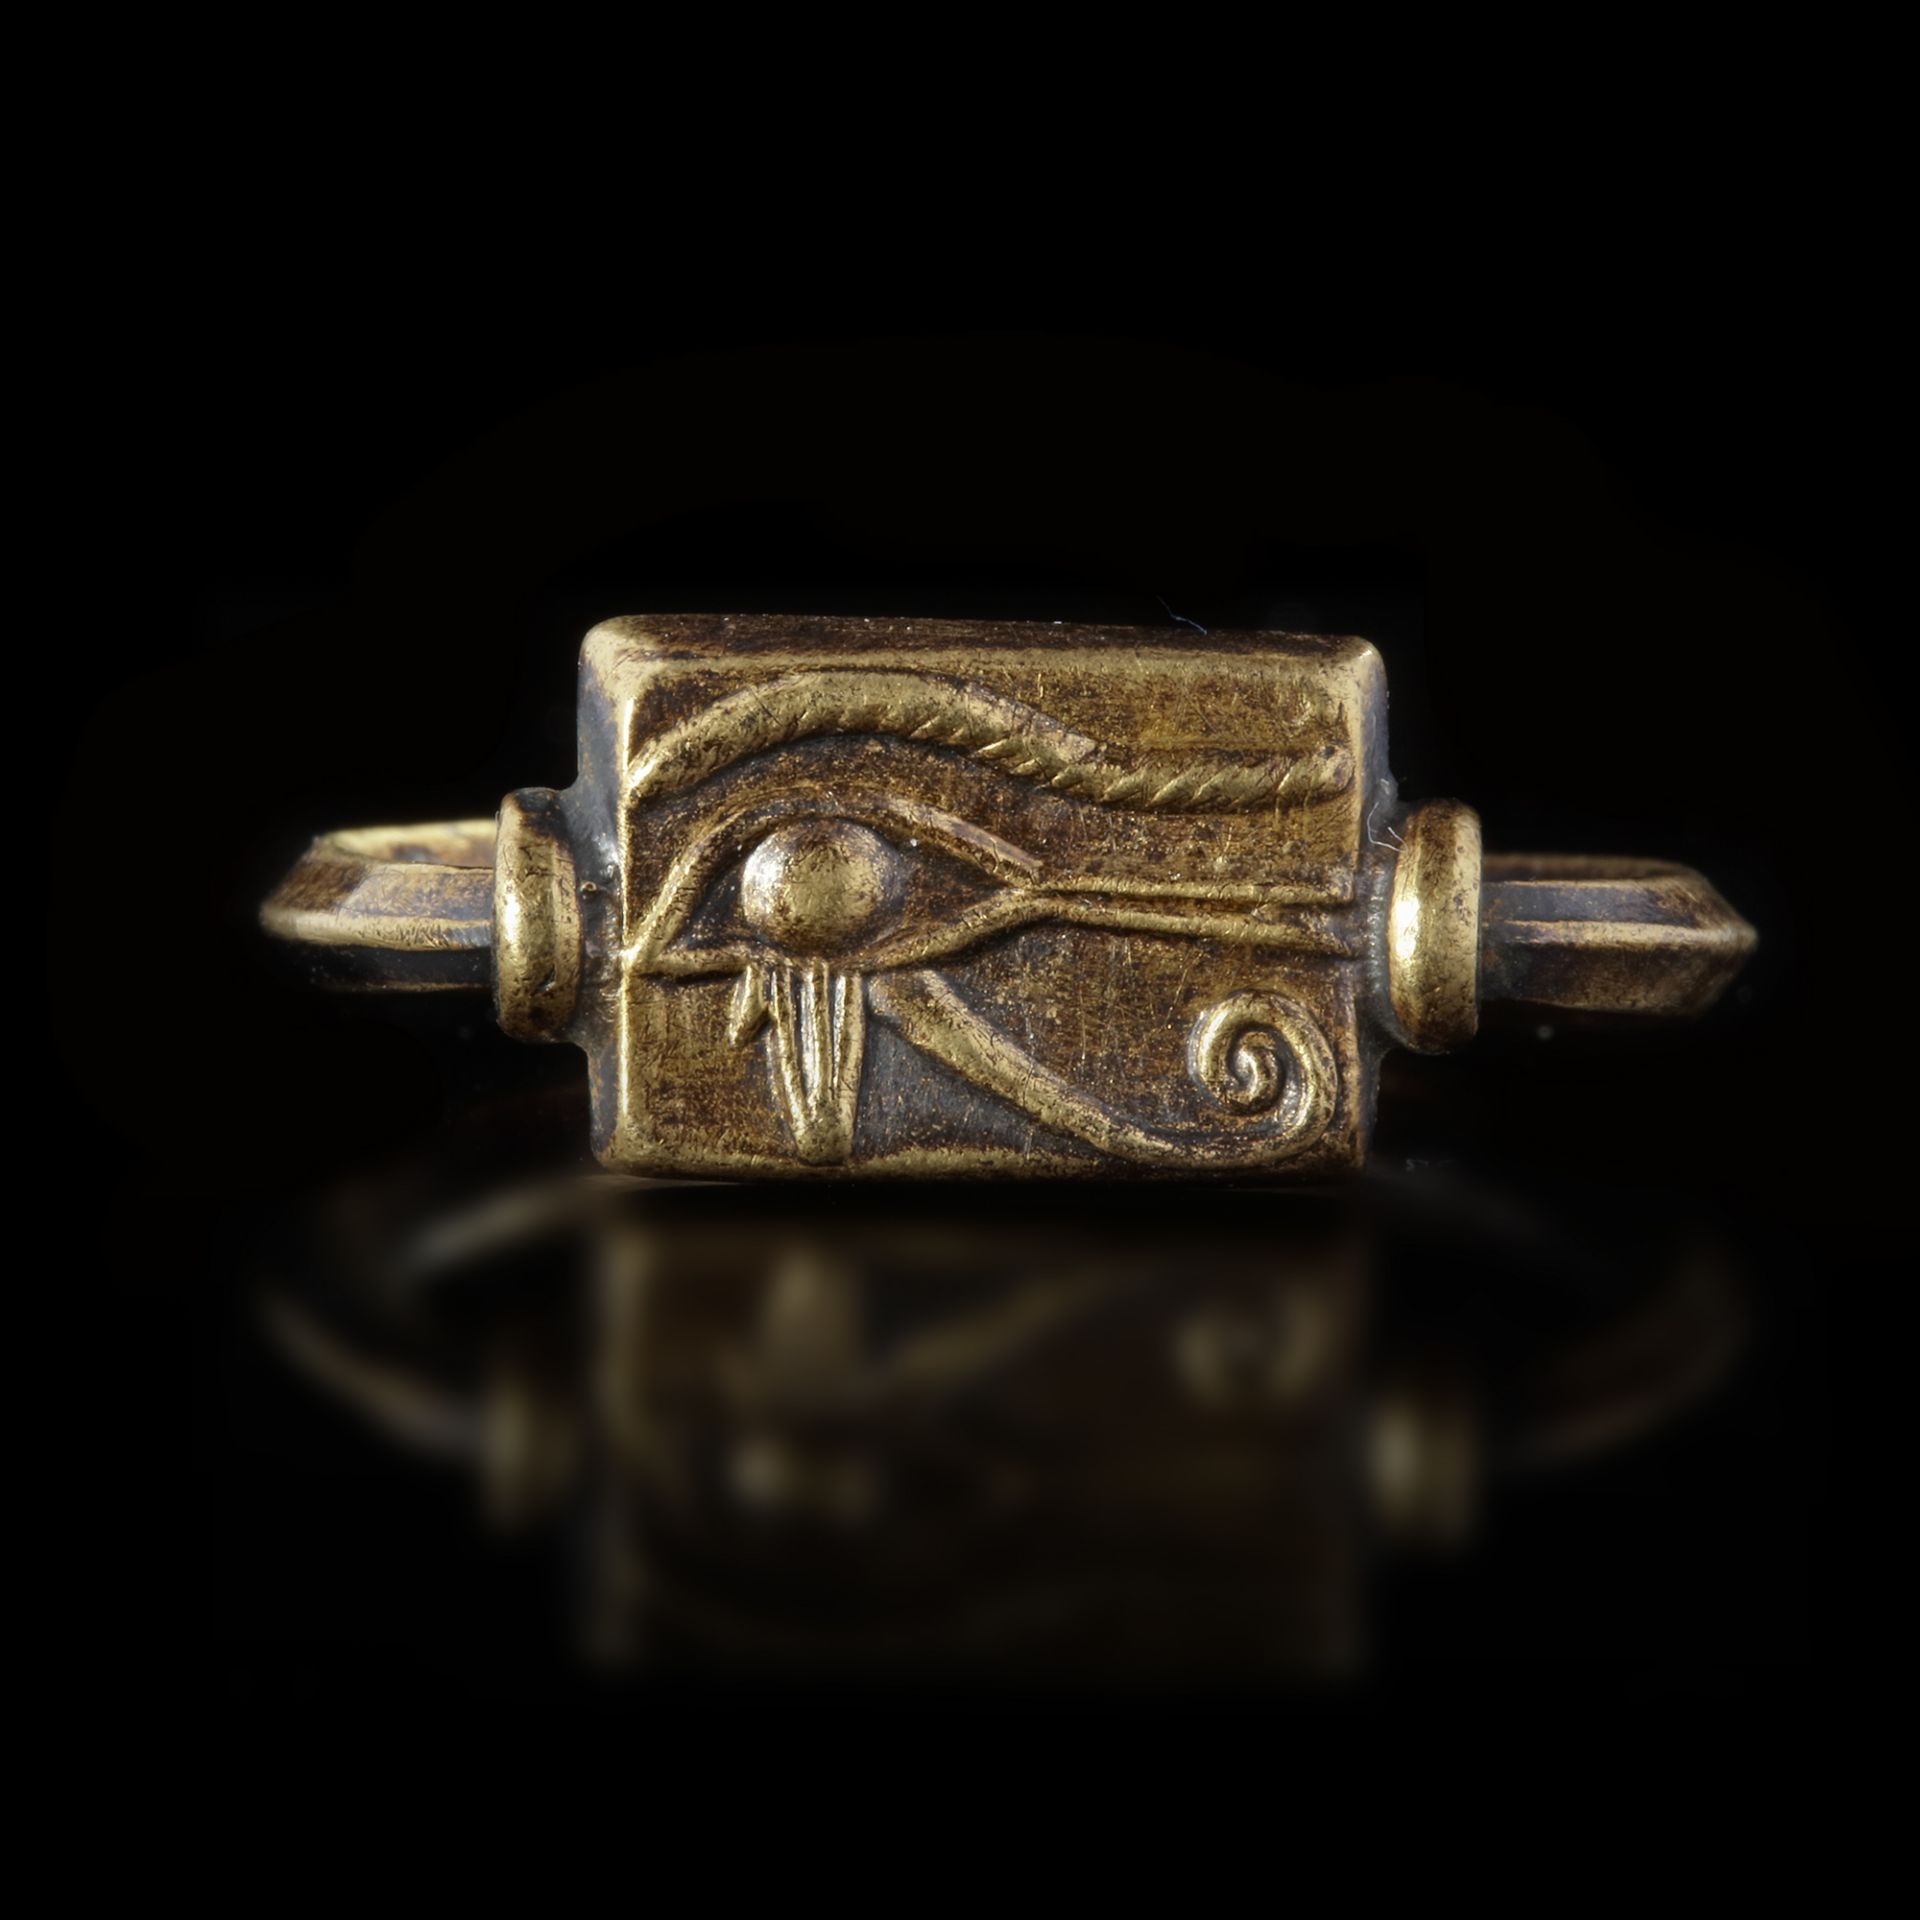 A PHOENICIAN RING IN GOLD WITH AN EYE OF HORUS, 6TH-7TH CENTURY CENTURY BC